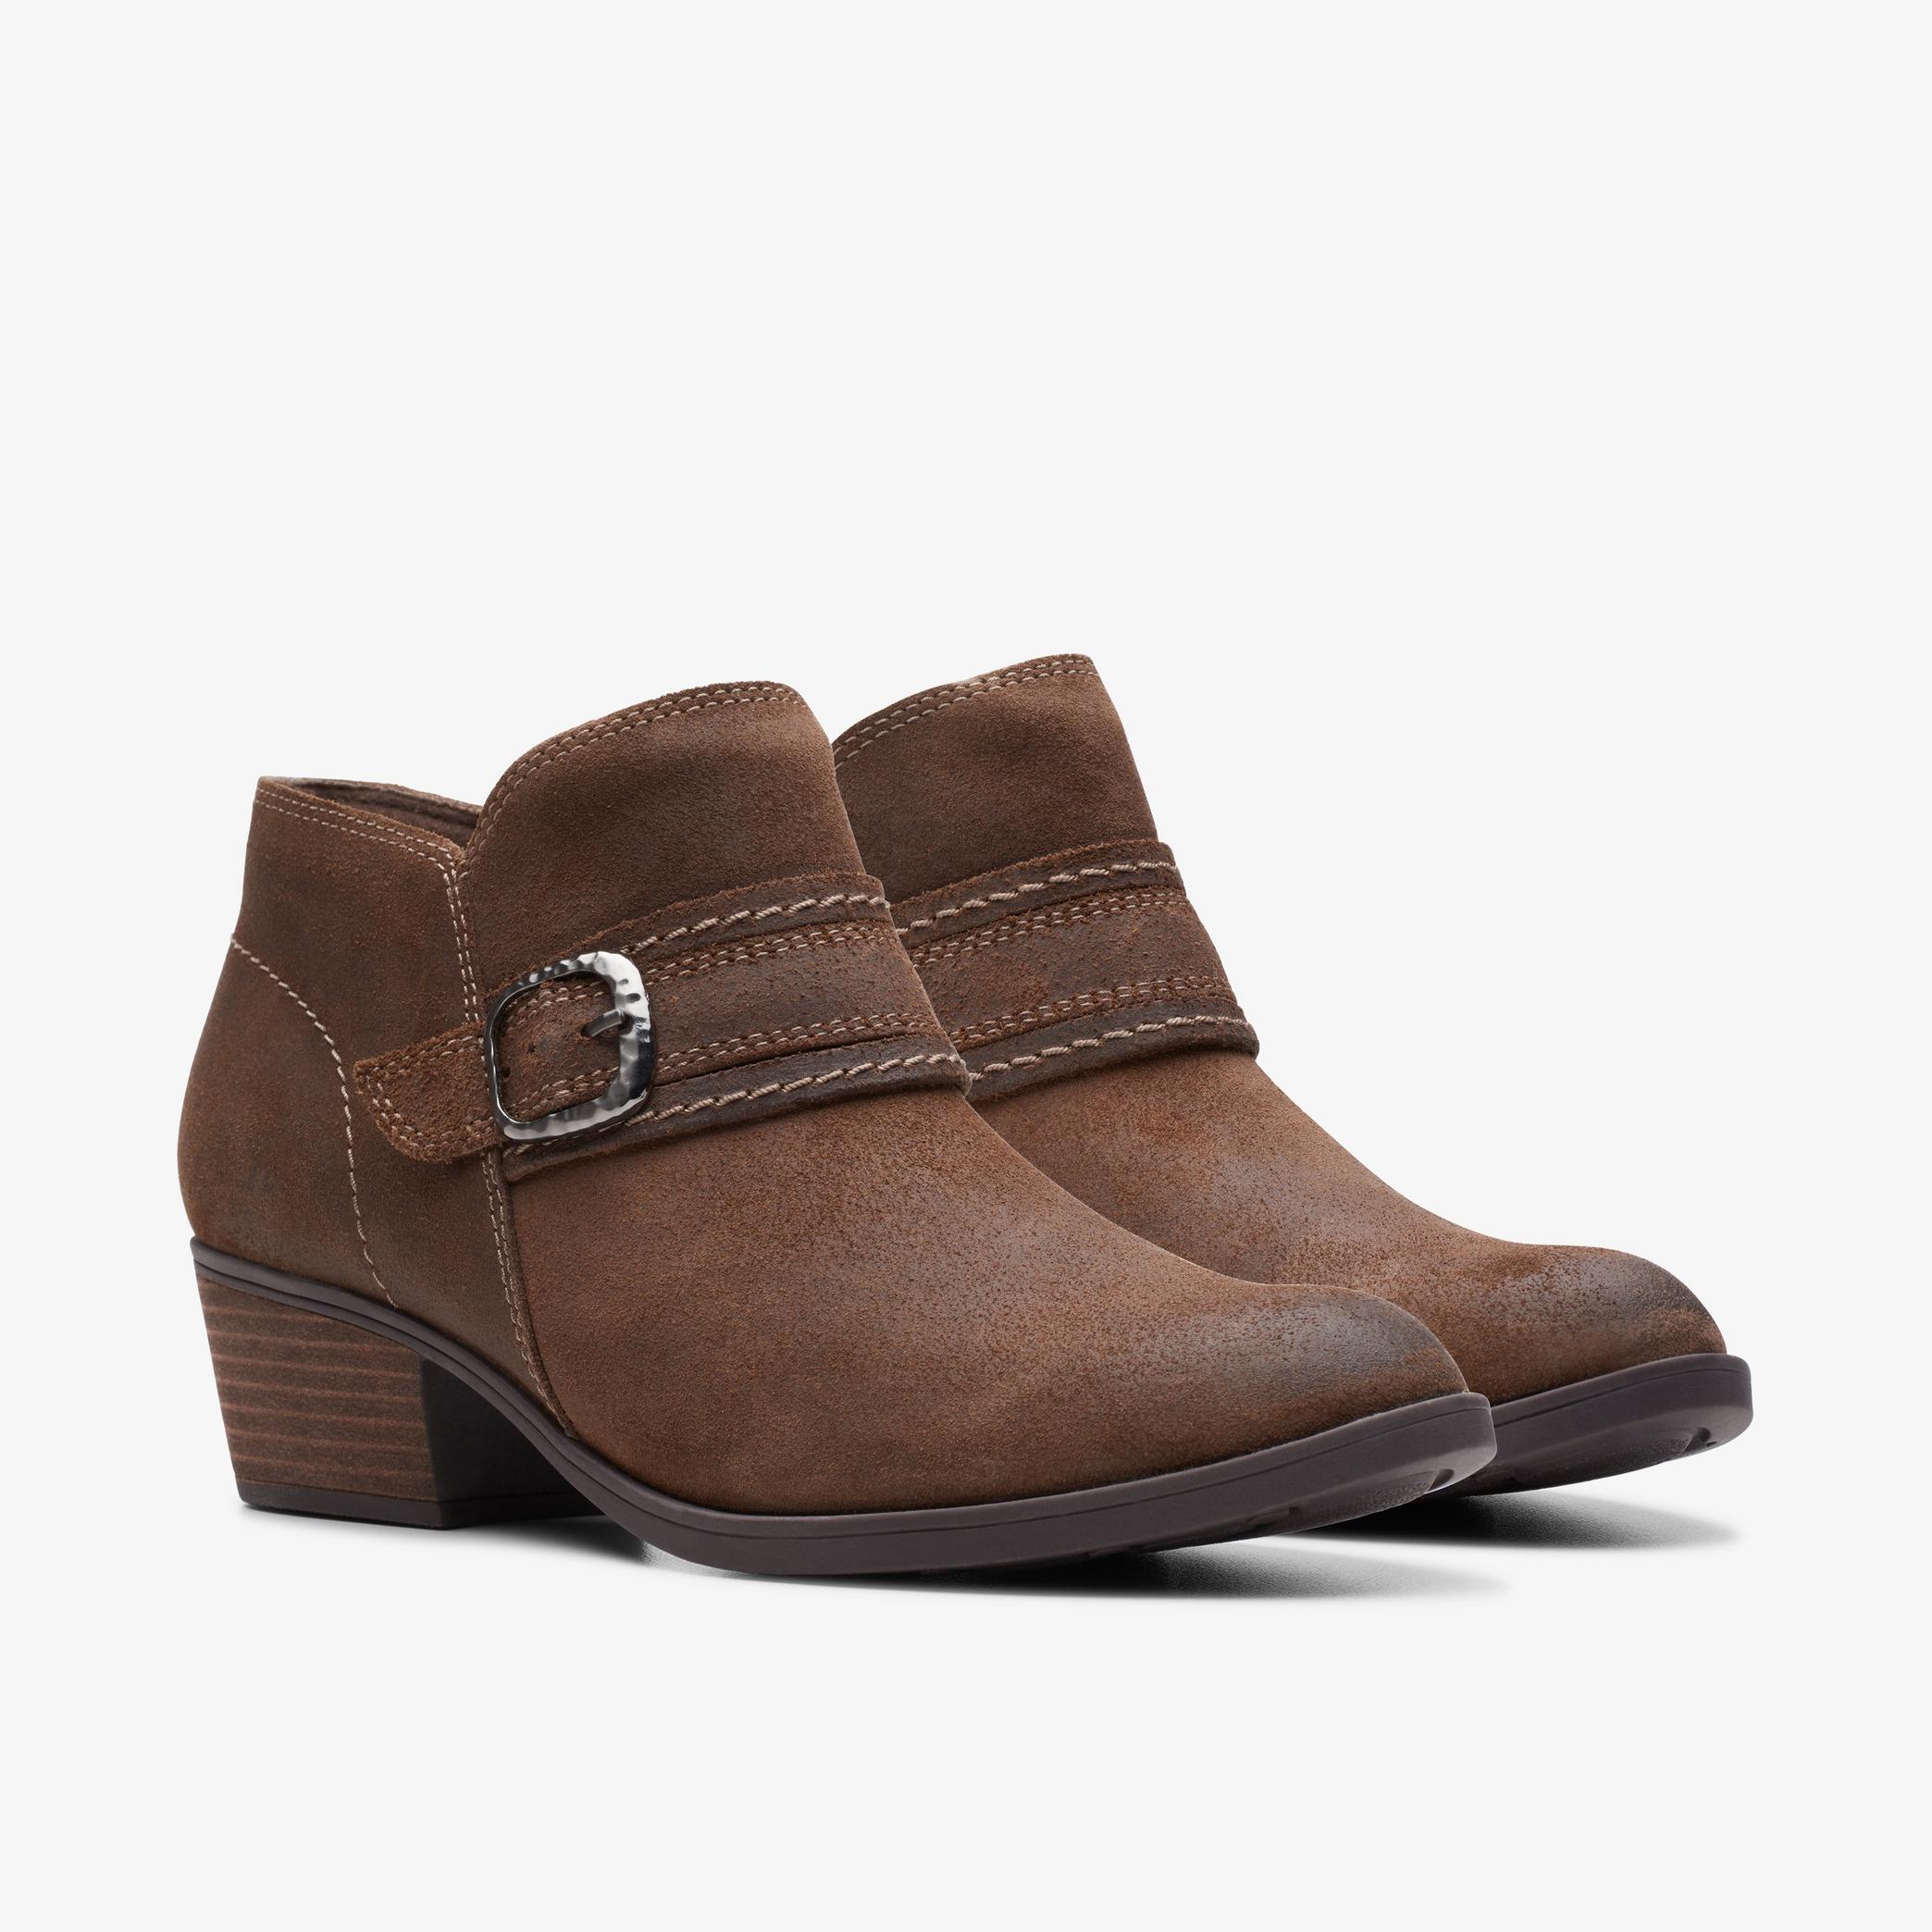 Charlten Bay Dark Tan Suede Ankle Boots, view 4 of 6